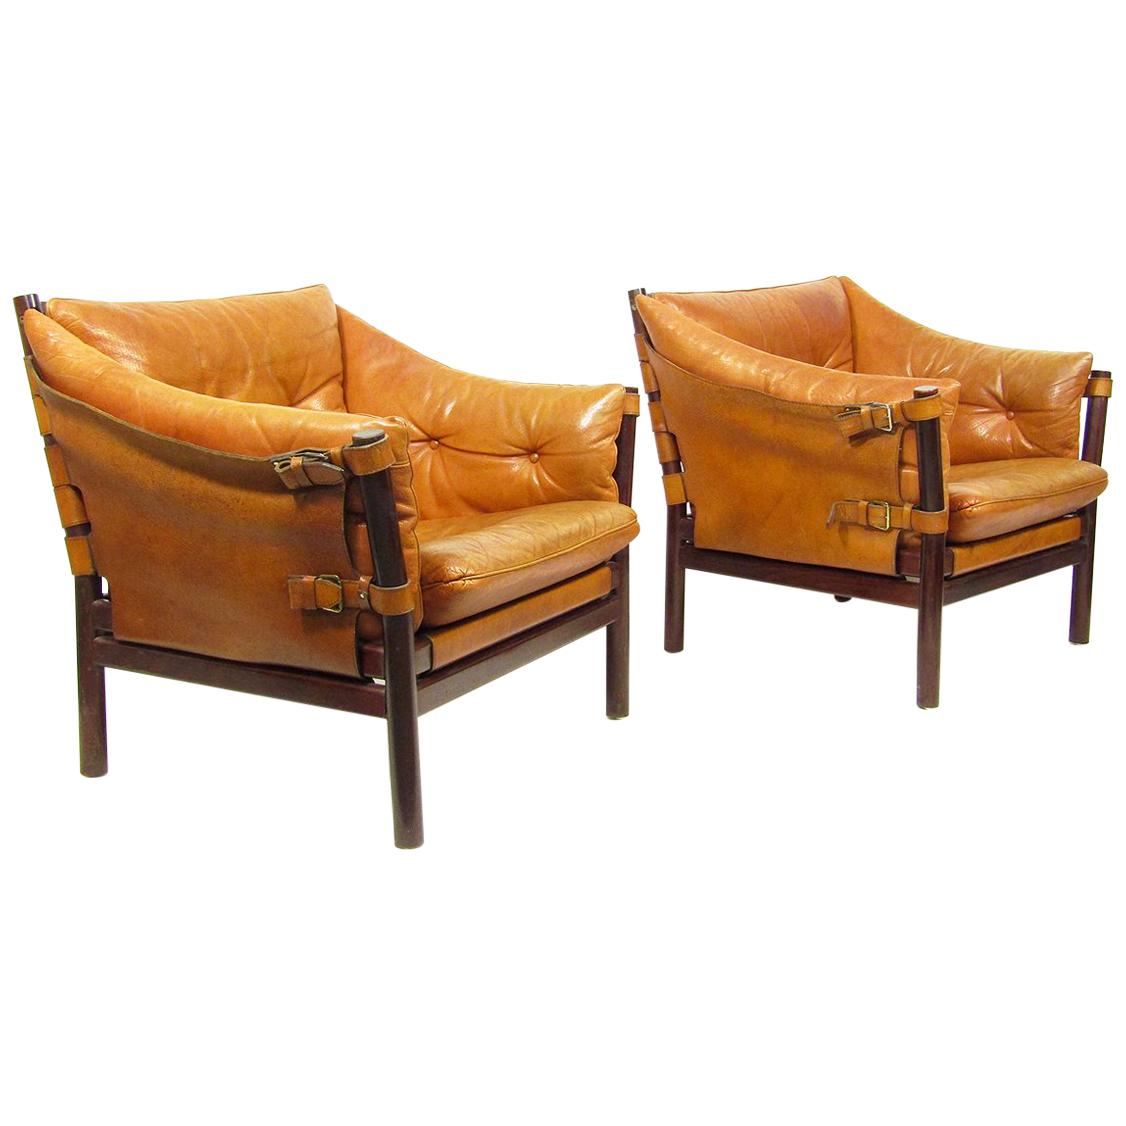 Two Swedish 1960s "Ilona" Safari Chairs by Arne Norell